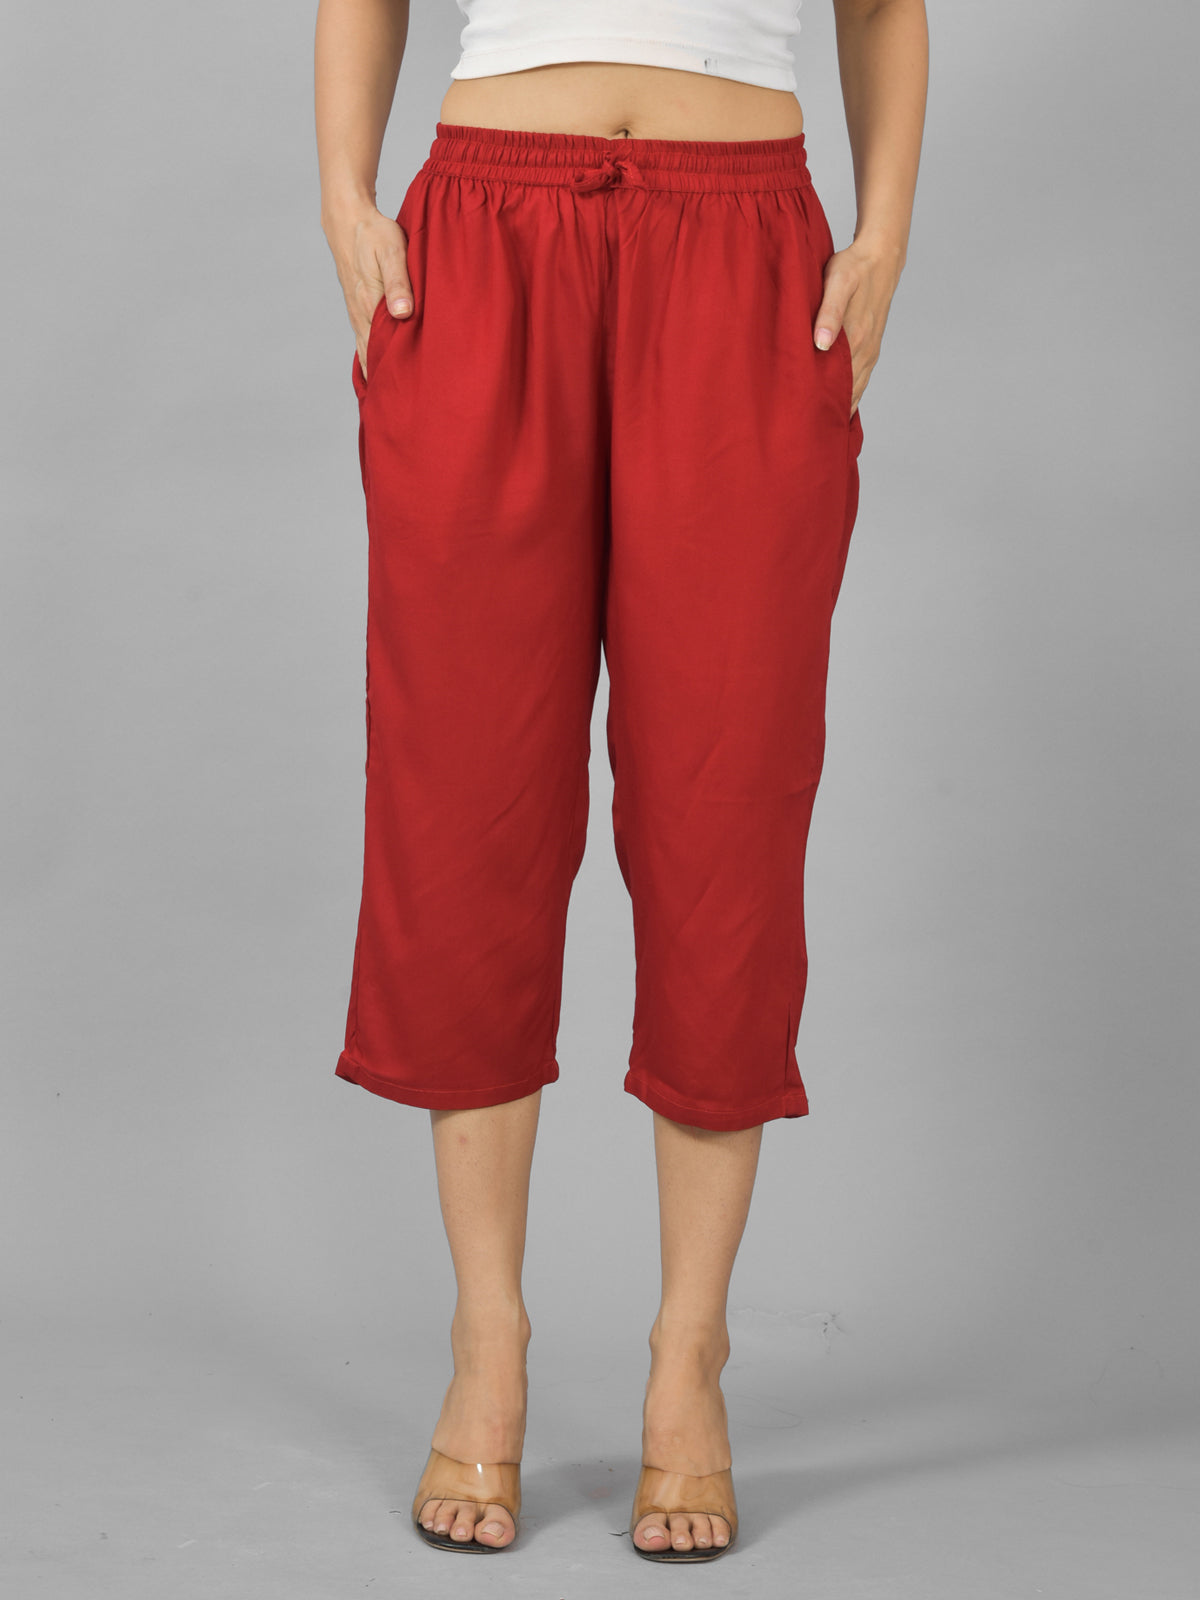 Pack Of 2 Womens Dark Grey And Maroon Calf Length Rayon Culottes Trouser Combo